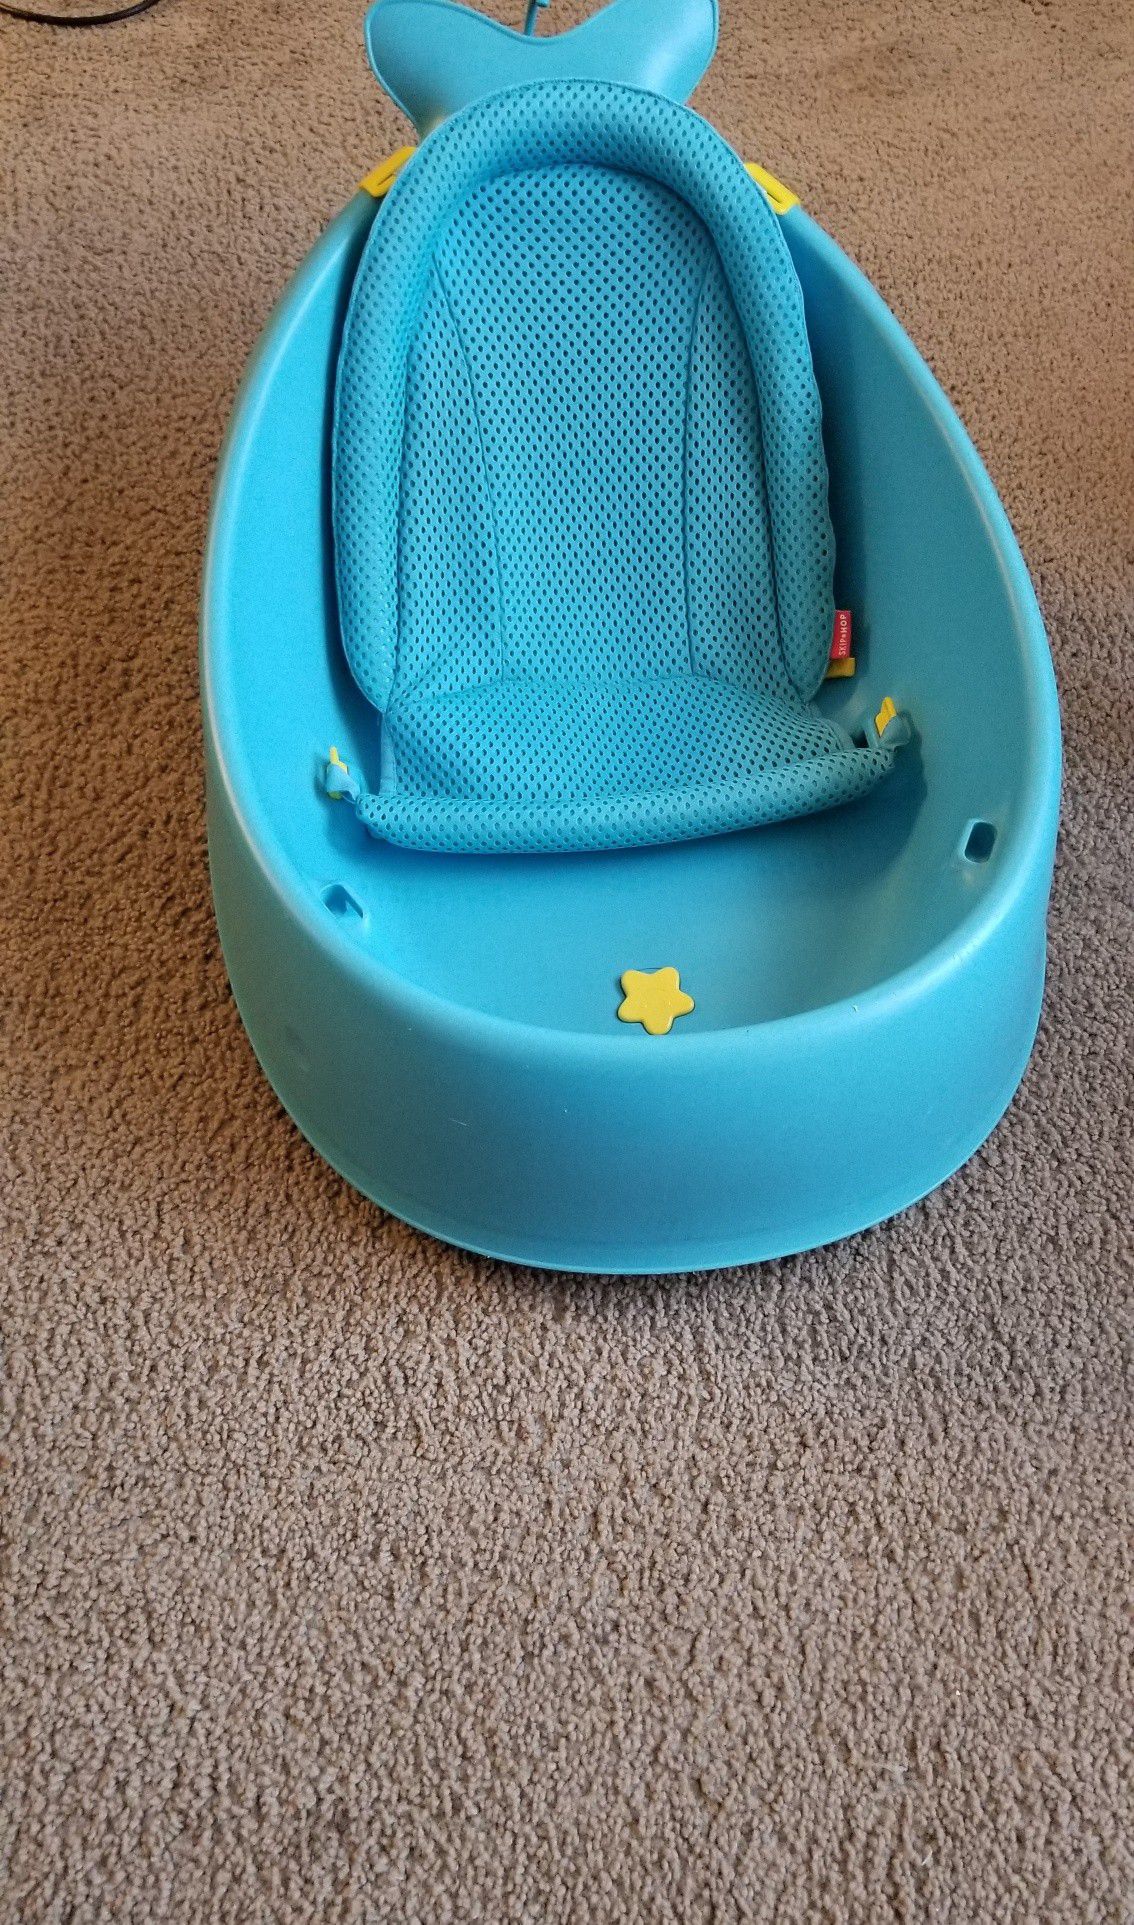 Bassinet/Changing table that vibrates . A Bumbo chair . And a SnapNgo stroller .